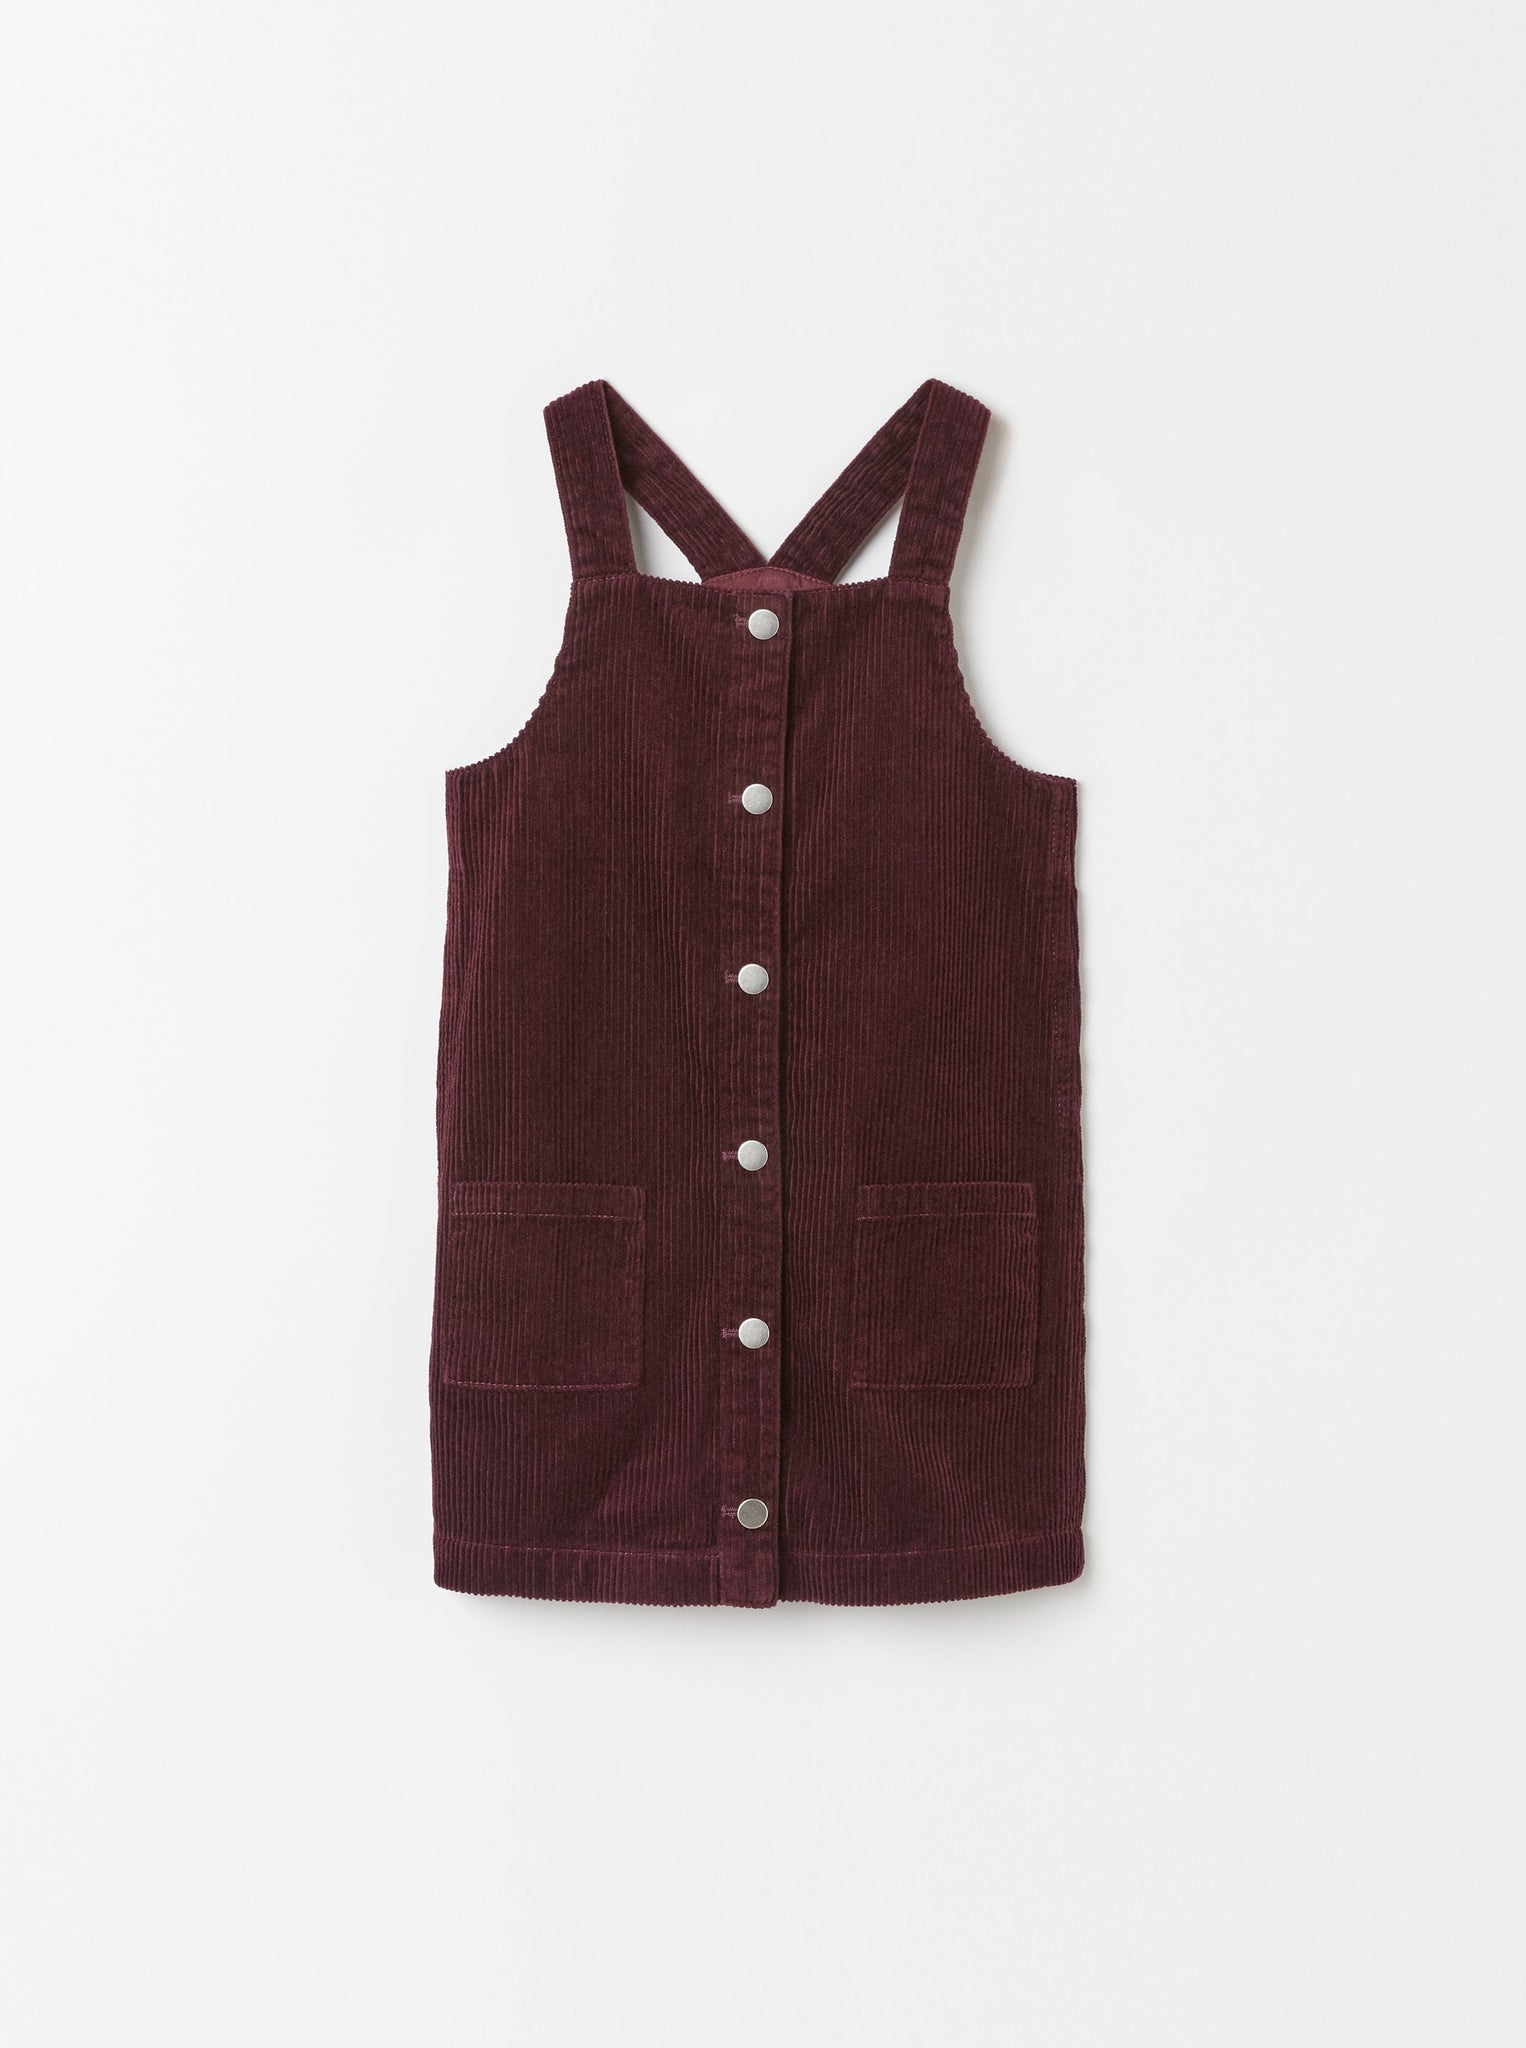 Organic Cotton Corduroy Kids Dress from the Polarn O. Pyret Kidswear collection. The best ethical kids clothes